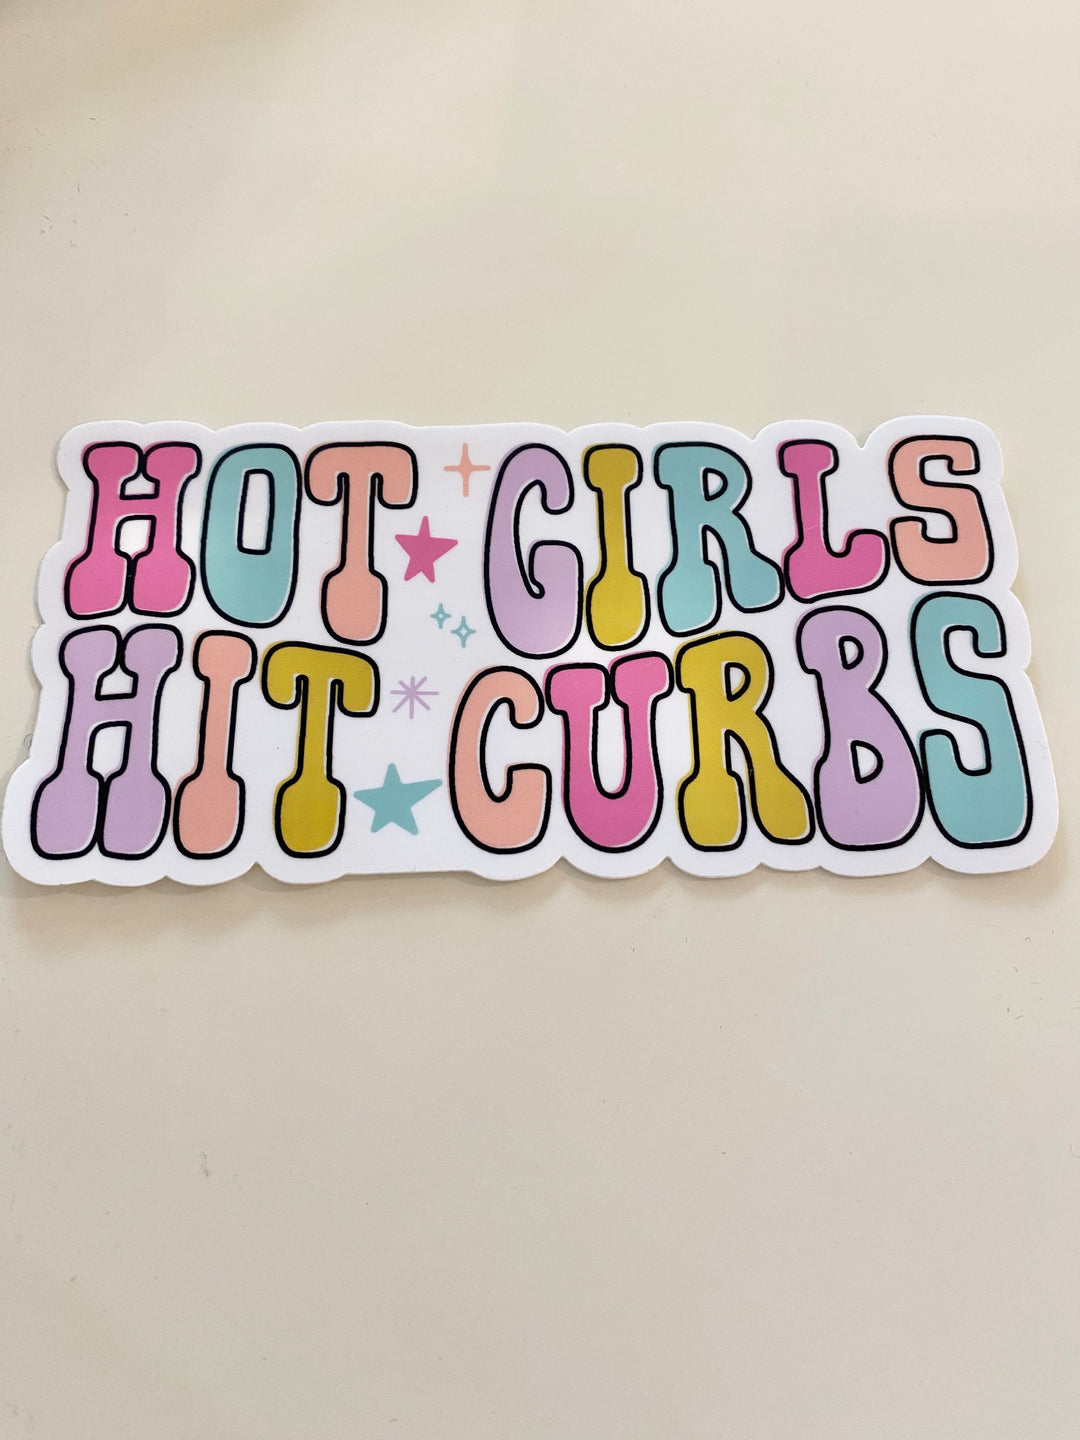 Hot Girls Hit Curbs - The Teal Antler Boutique